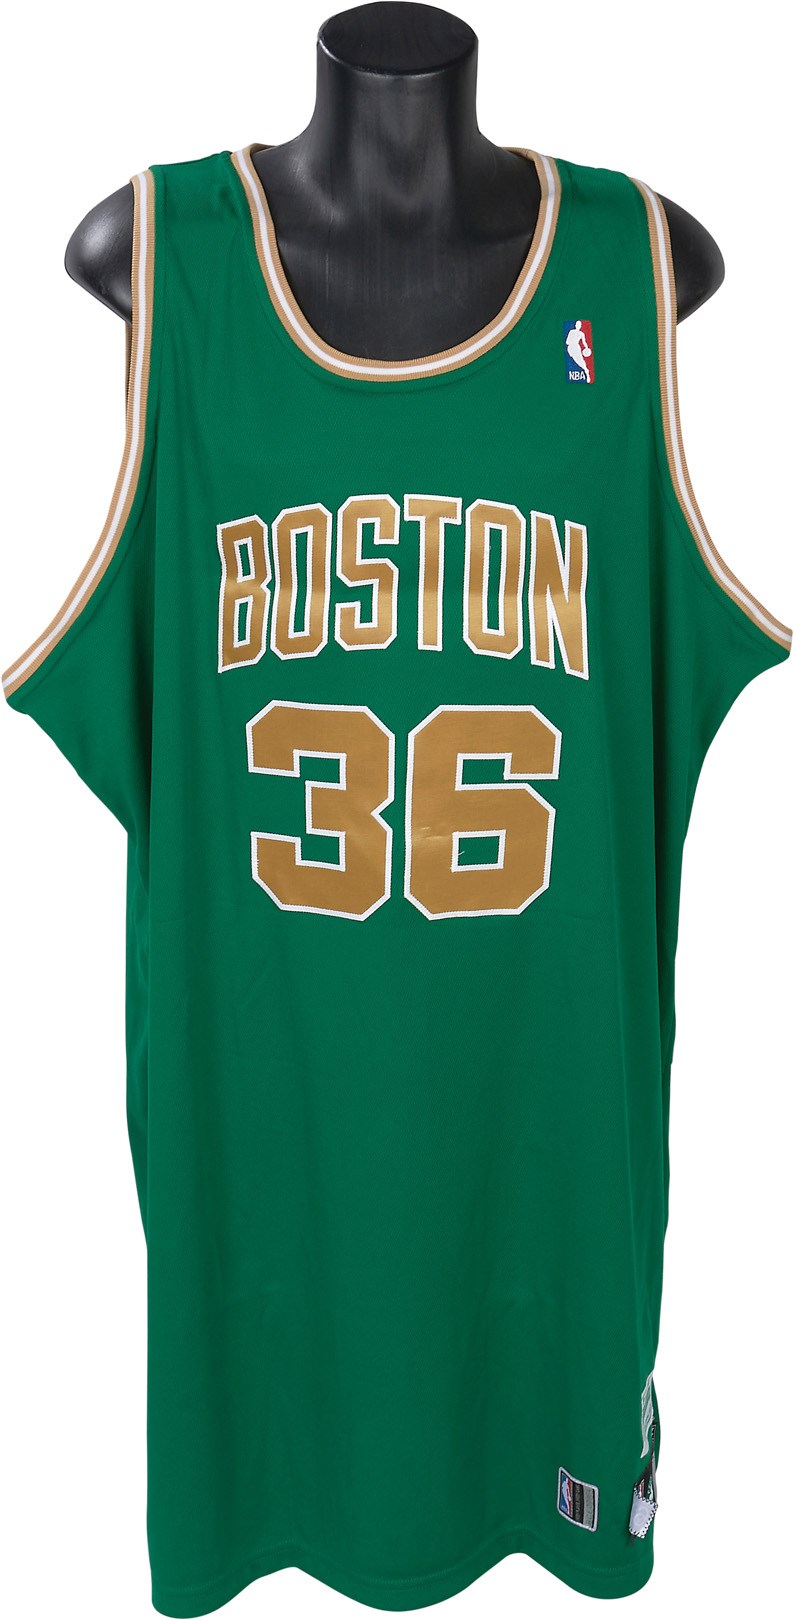 2010-11 Shaquille O'Neal St. Patrick's Day Boston Celtics Game Issued Signed Jersey (LOA Shaq's personal chef)